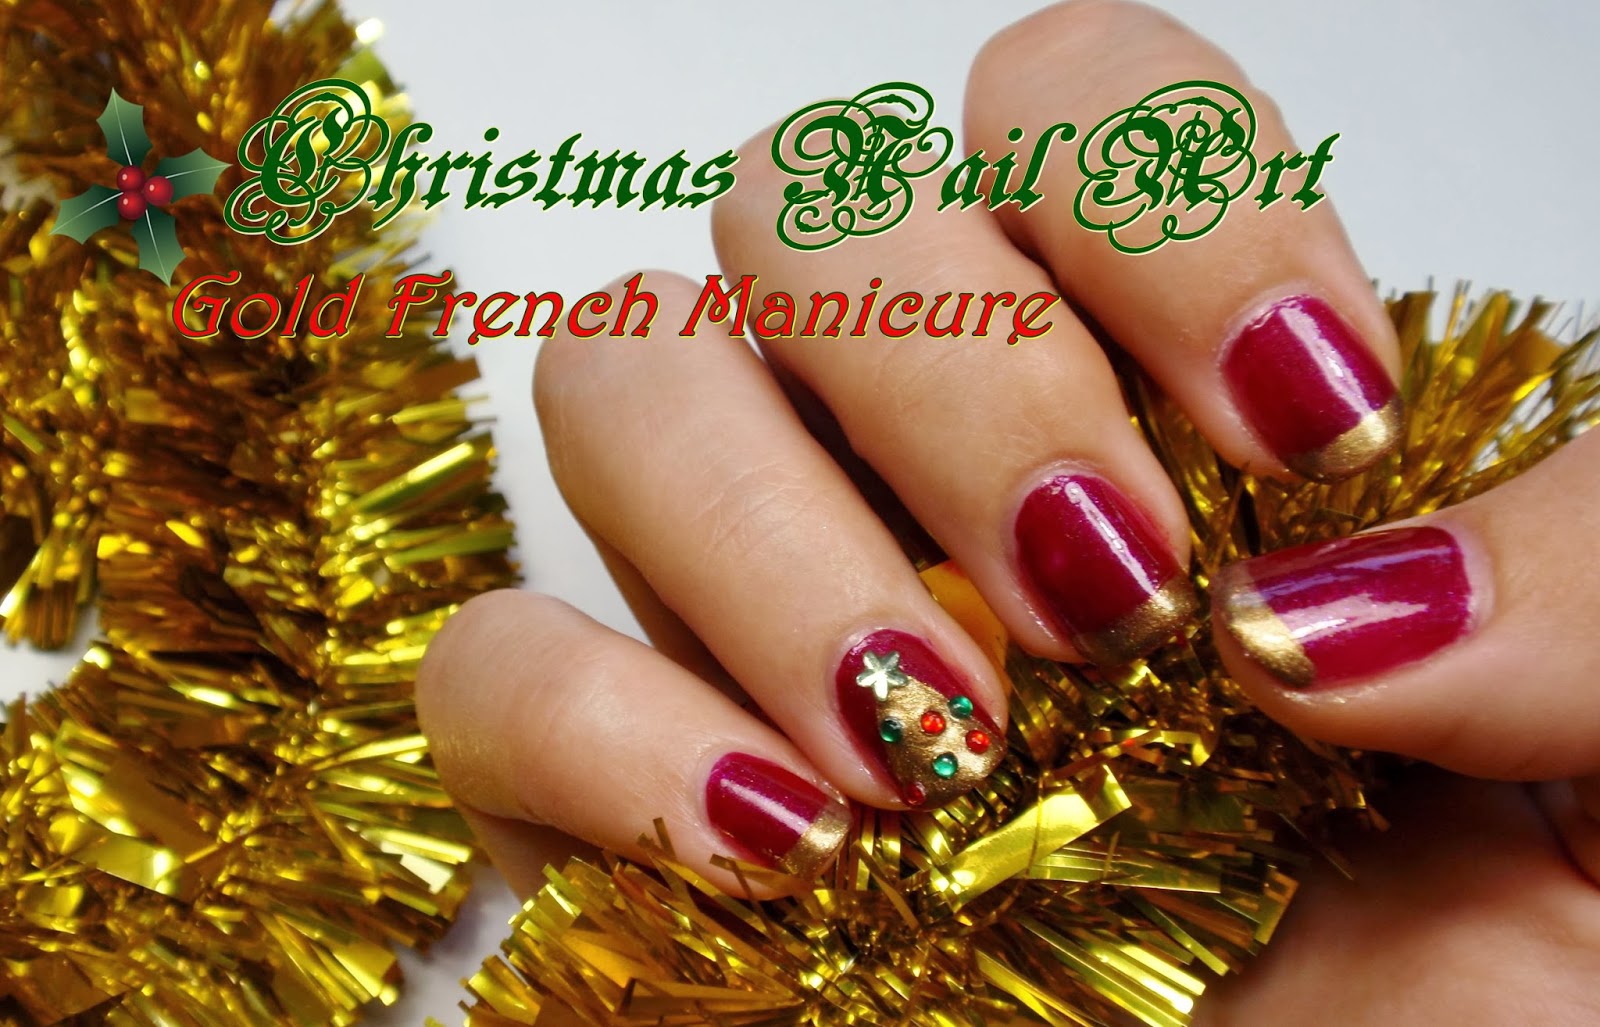 5. "Red and Gold French Manicure for the Holidays" - wide 2